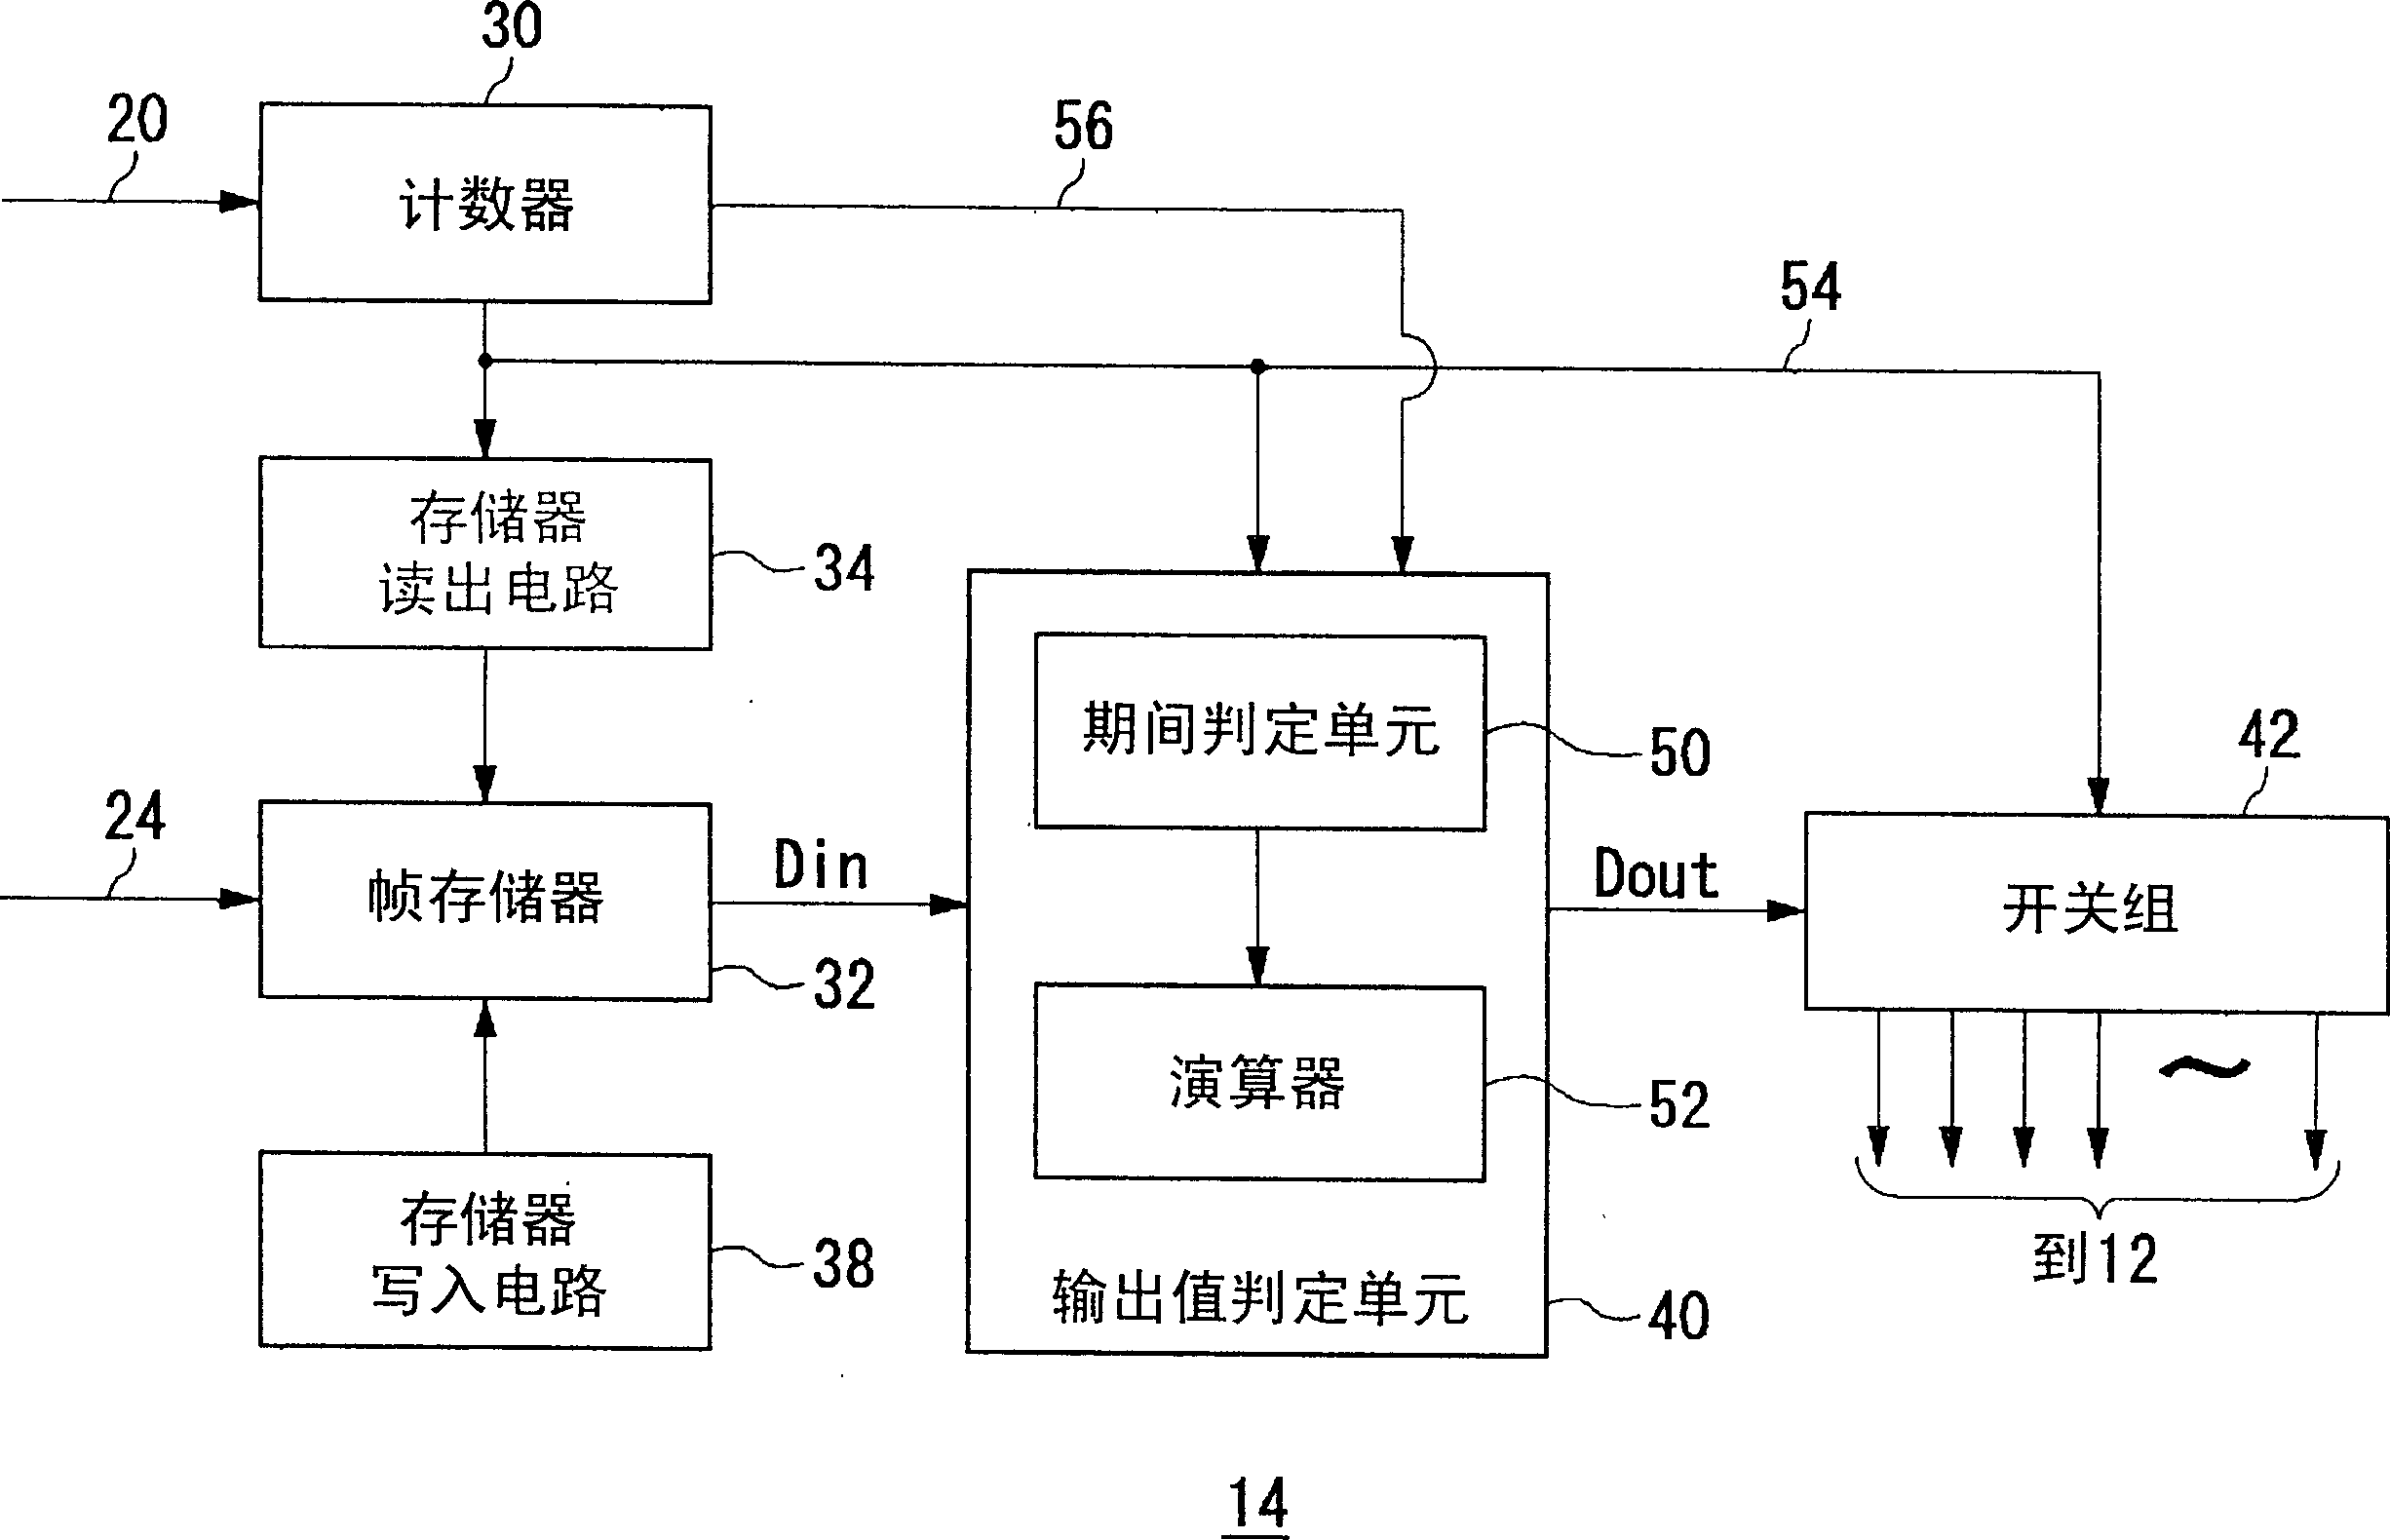 Displaying method, displaying device, and data write circuit for such displaying device